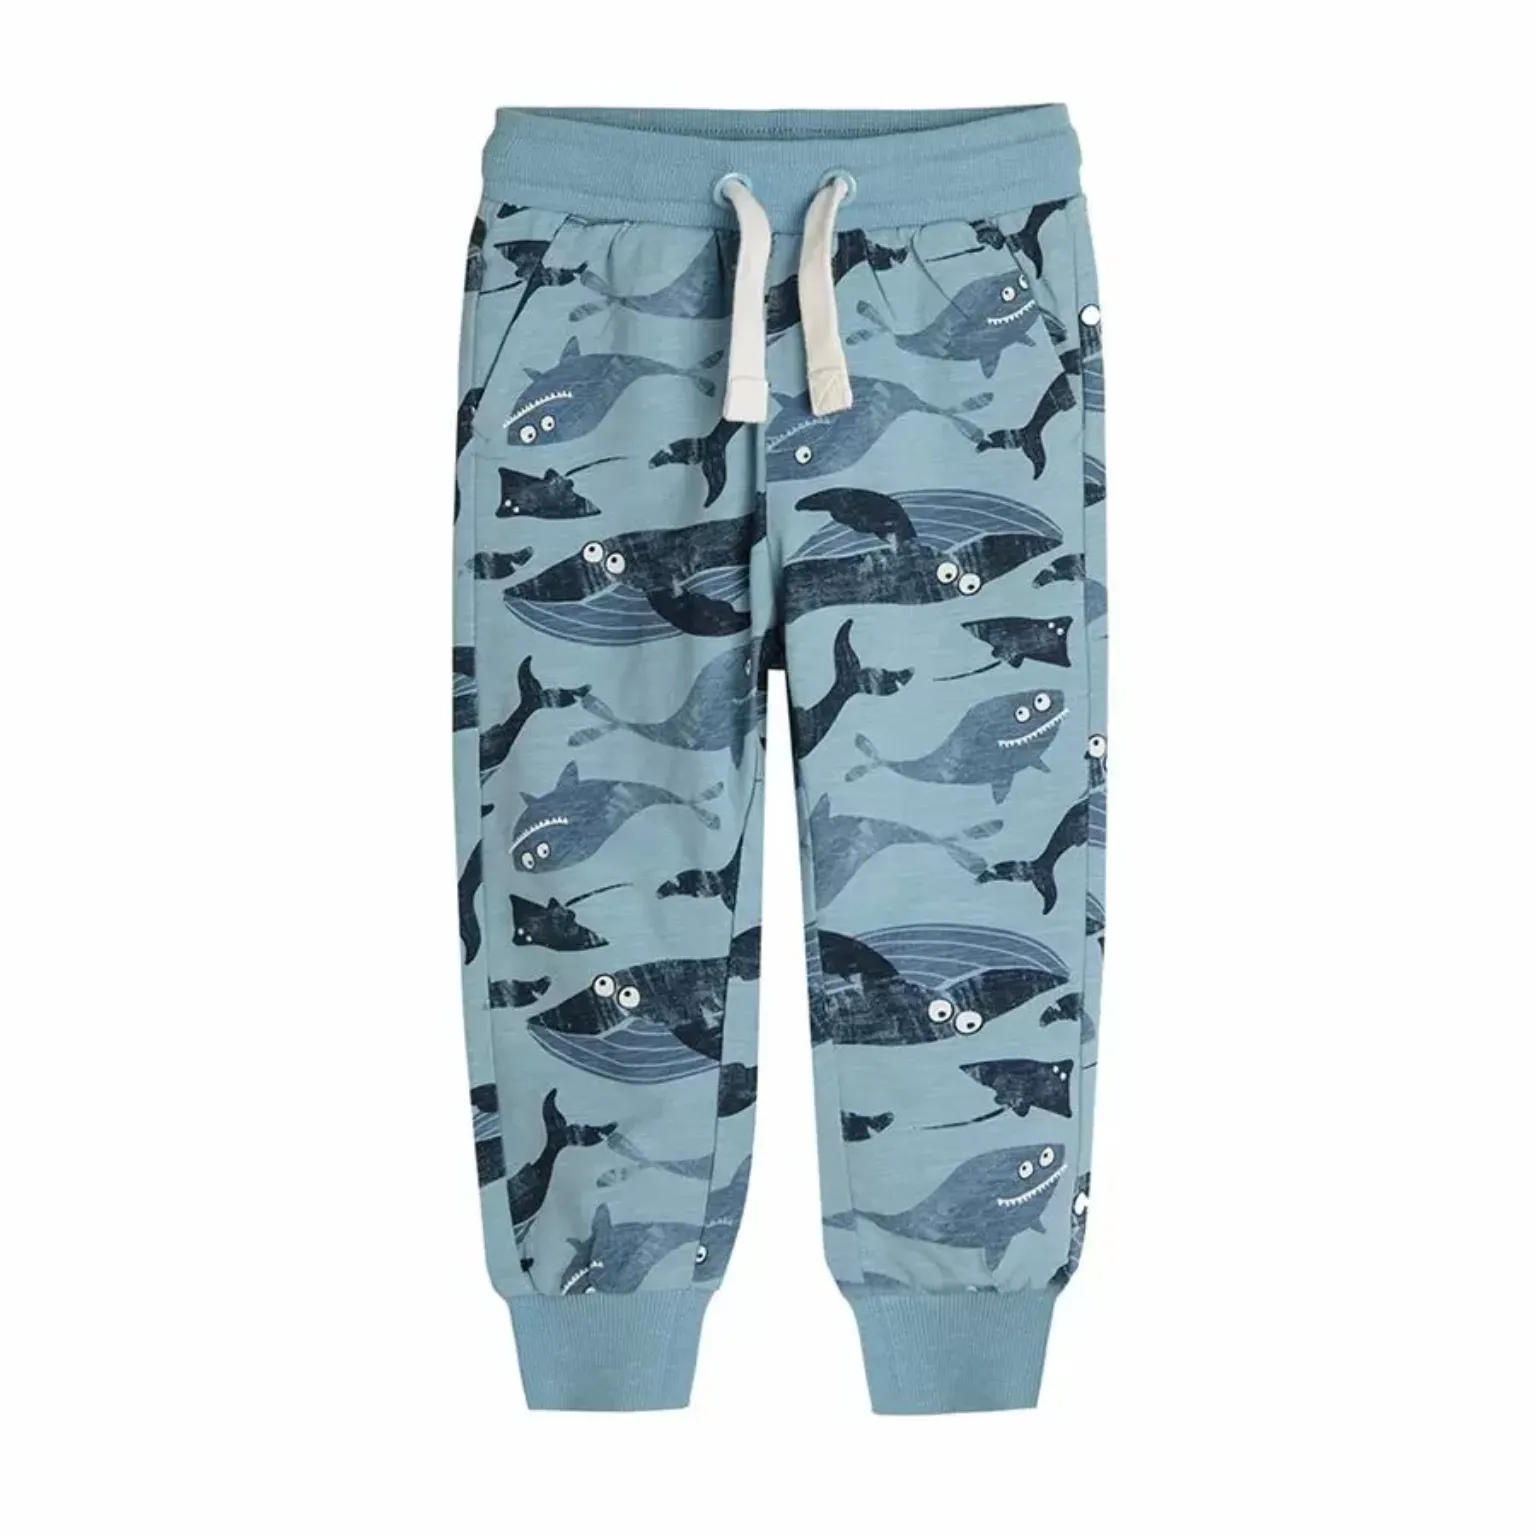 Printed Jogging Trouser manufacturing with the latest innovations